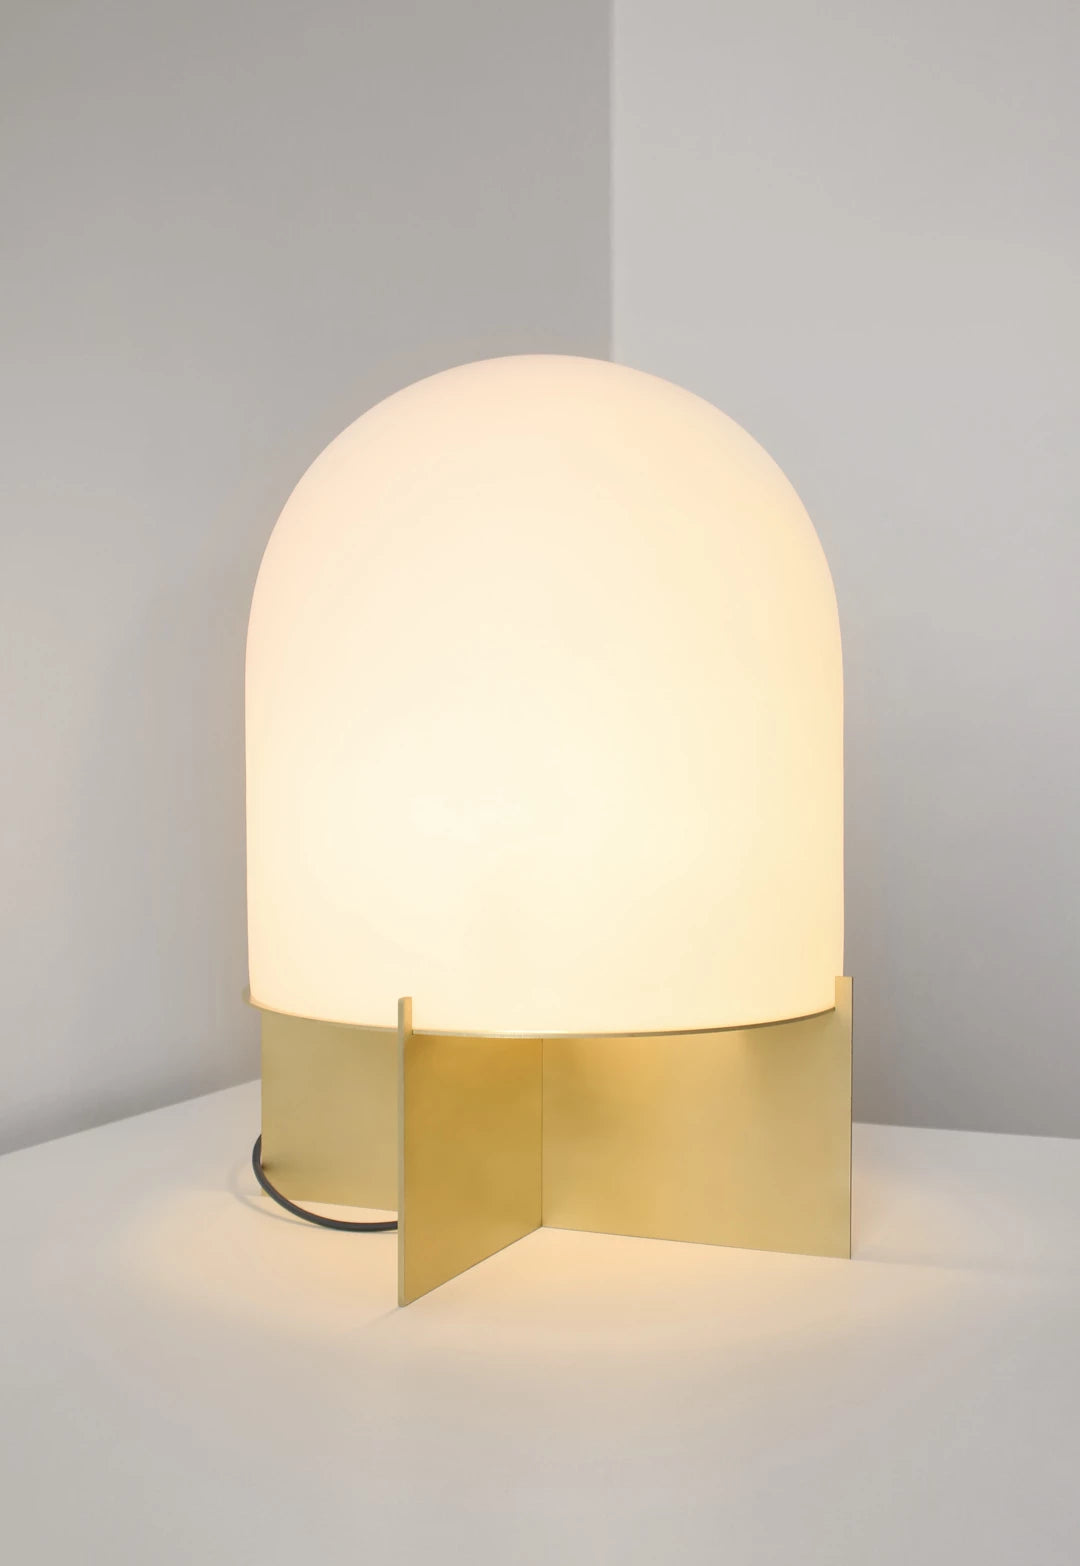 Dome Light by SkLo